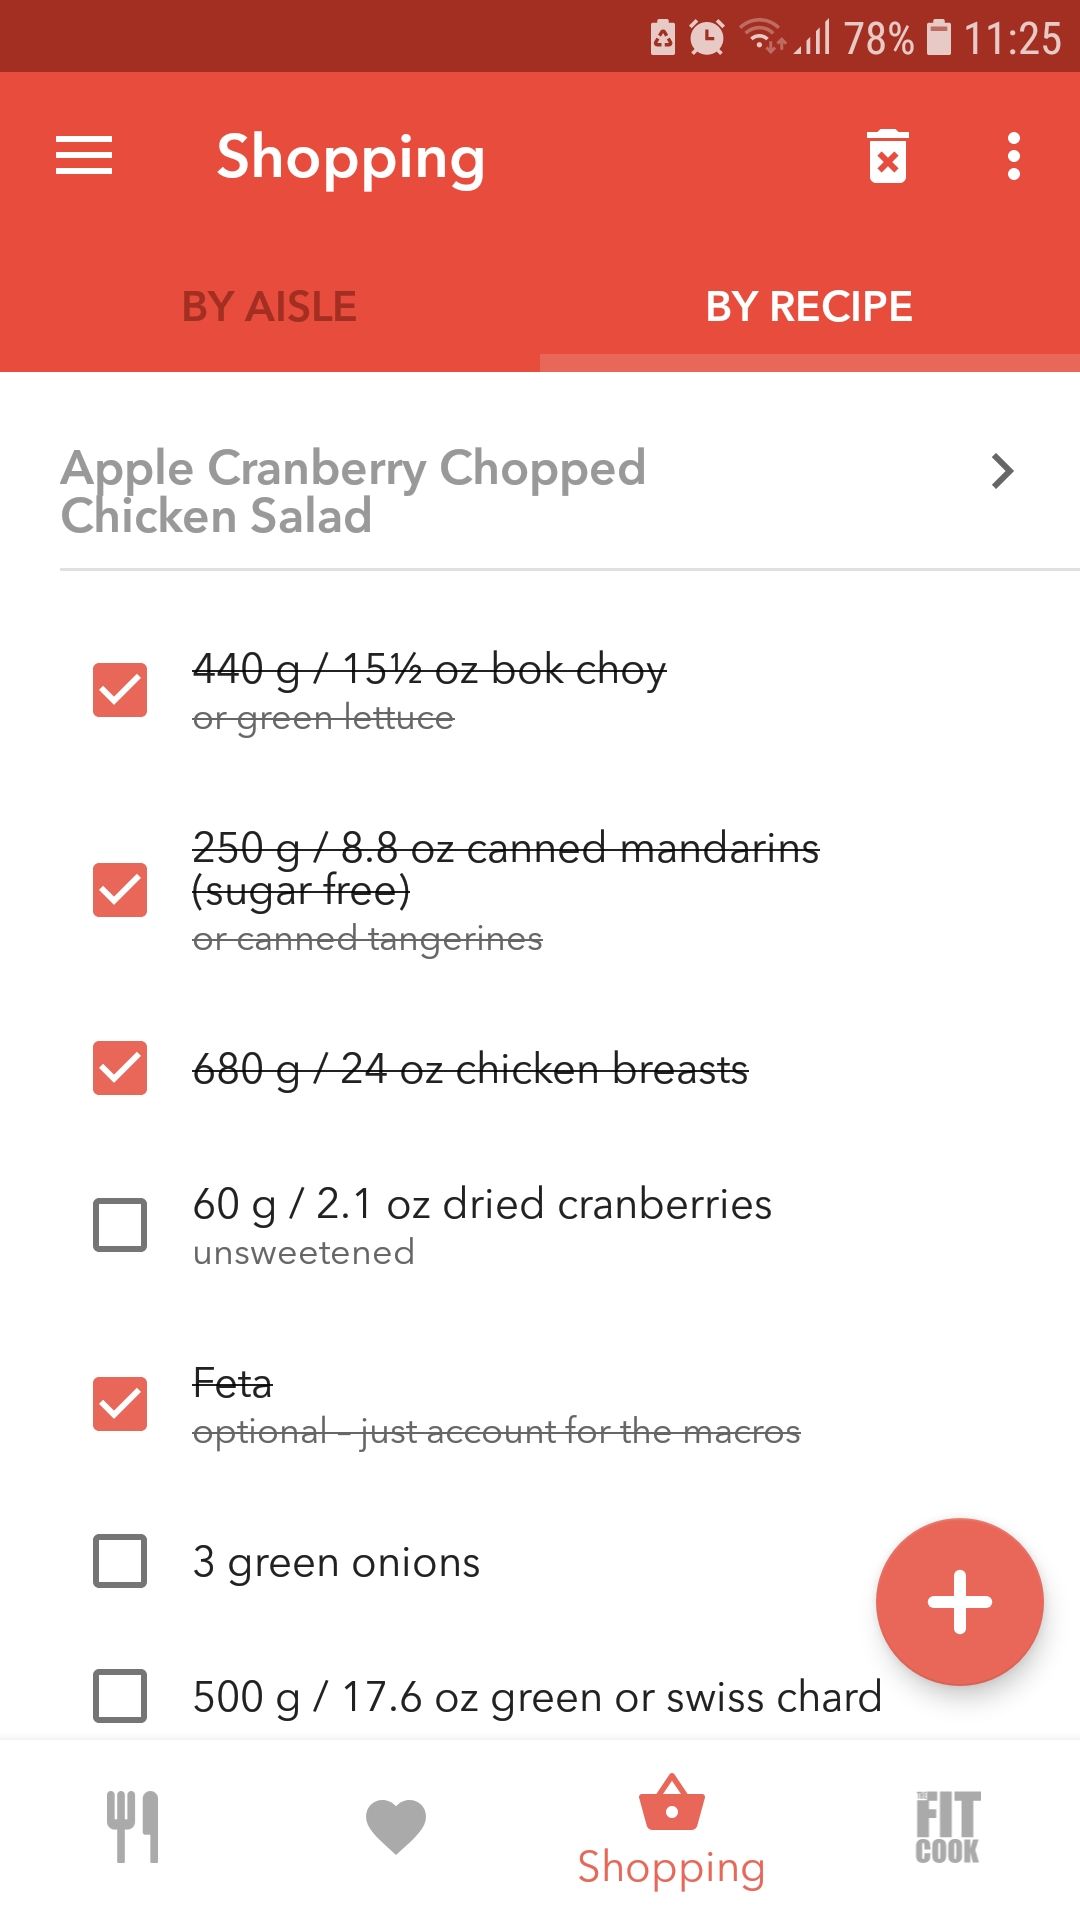 FitMenCook mobile healthy cooking app shopping by recipe